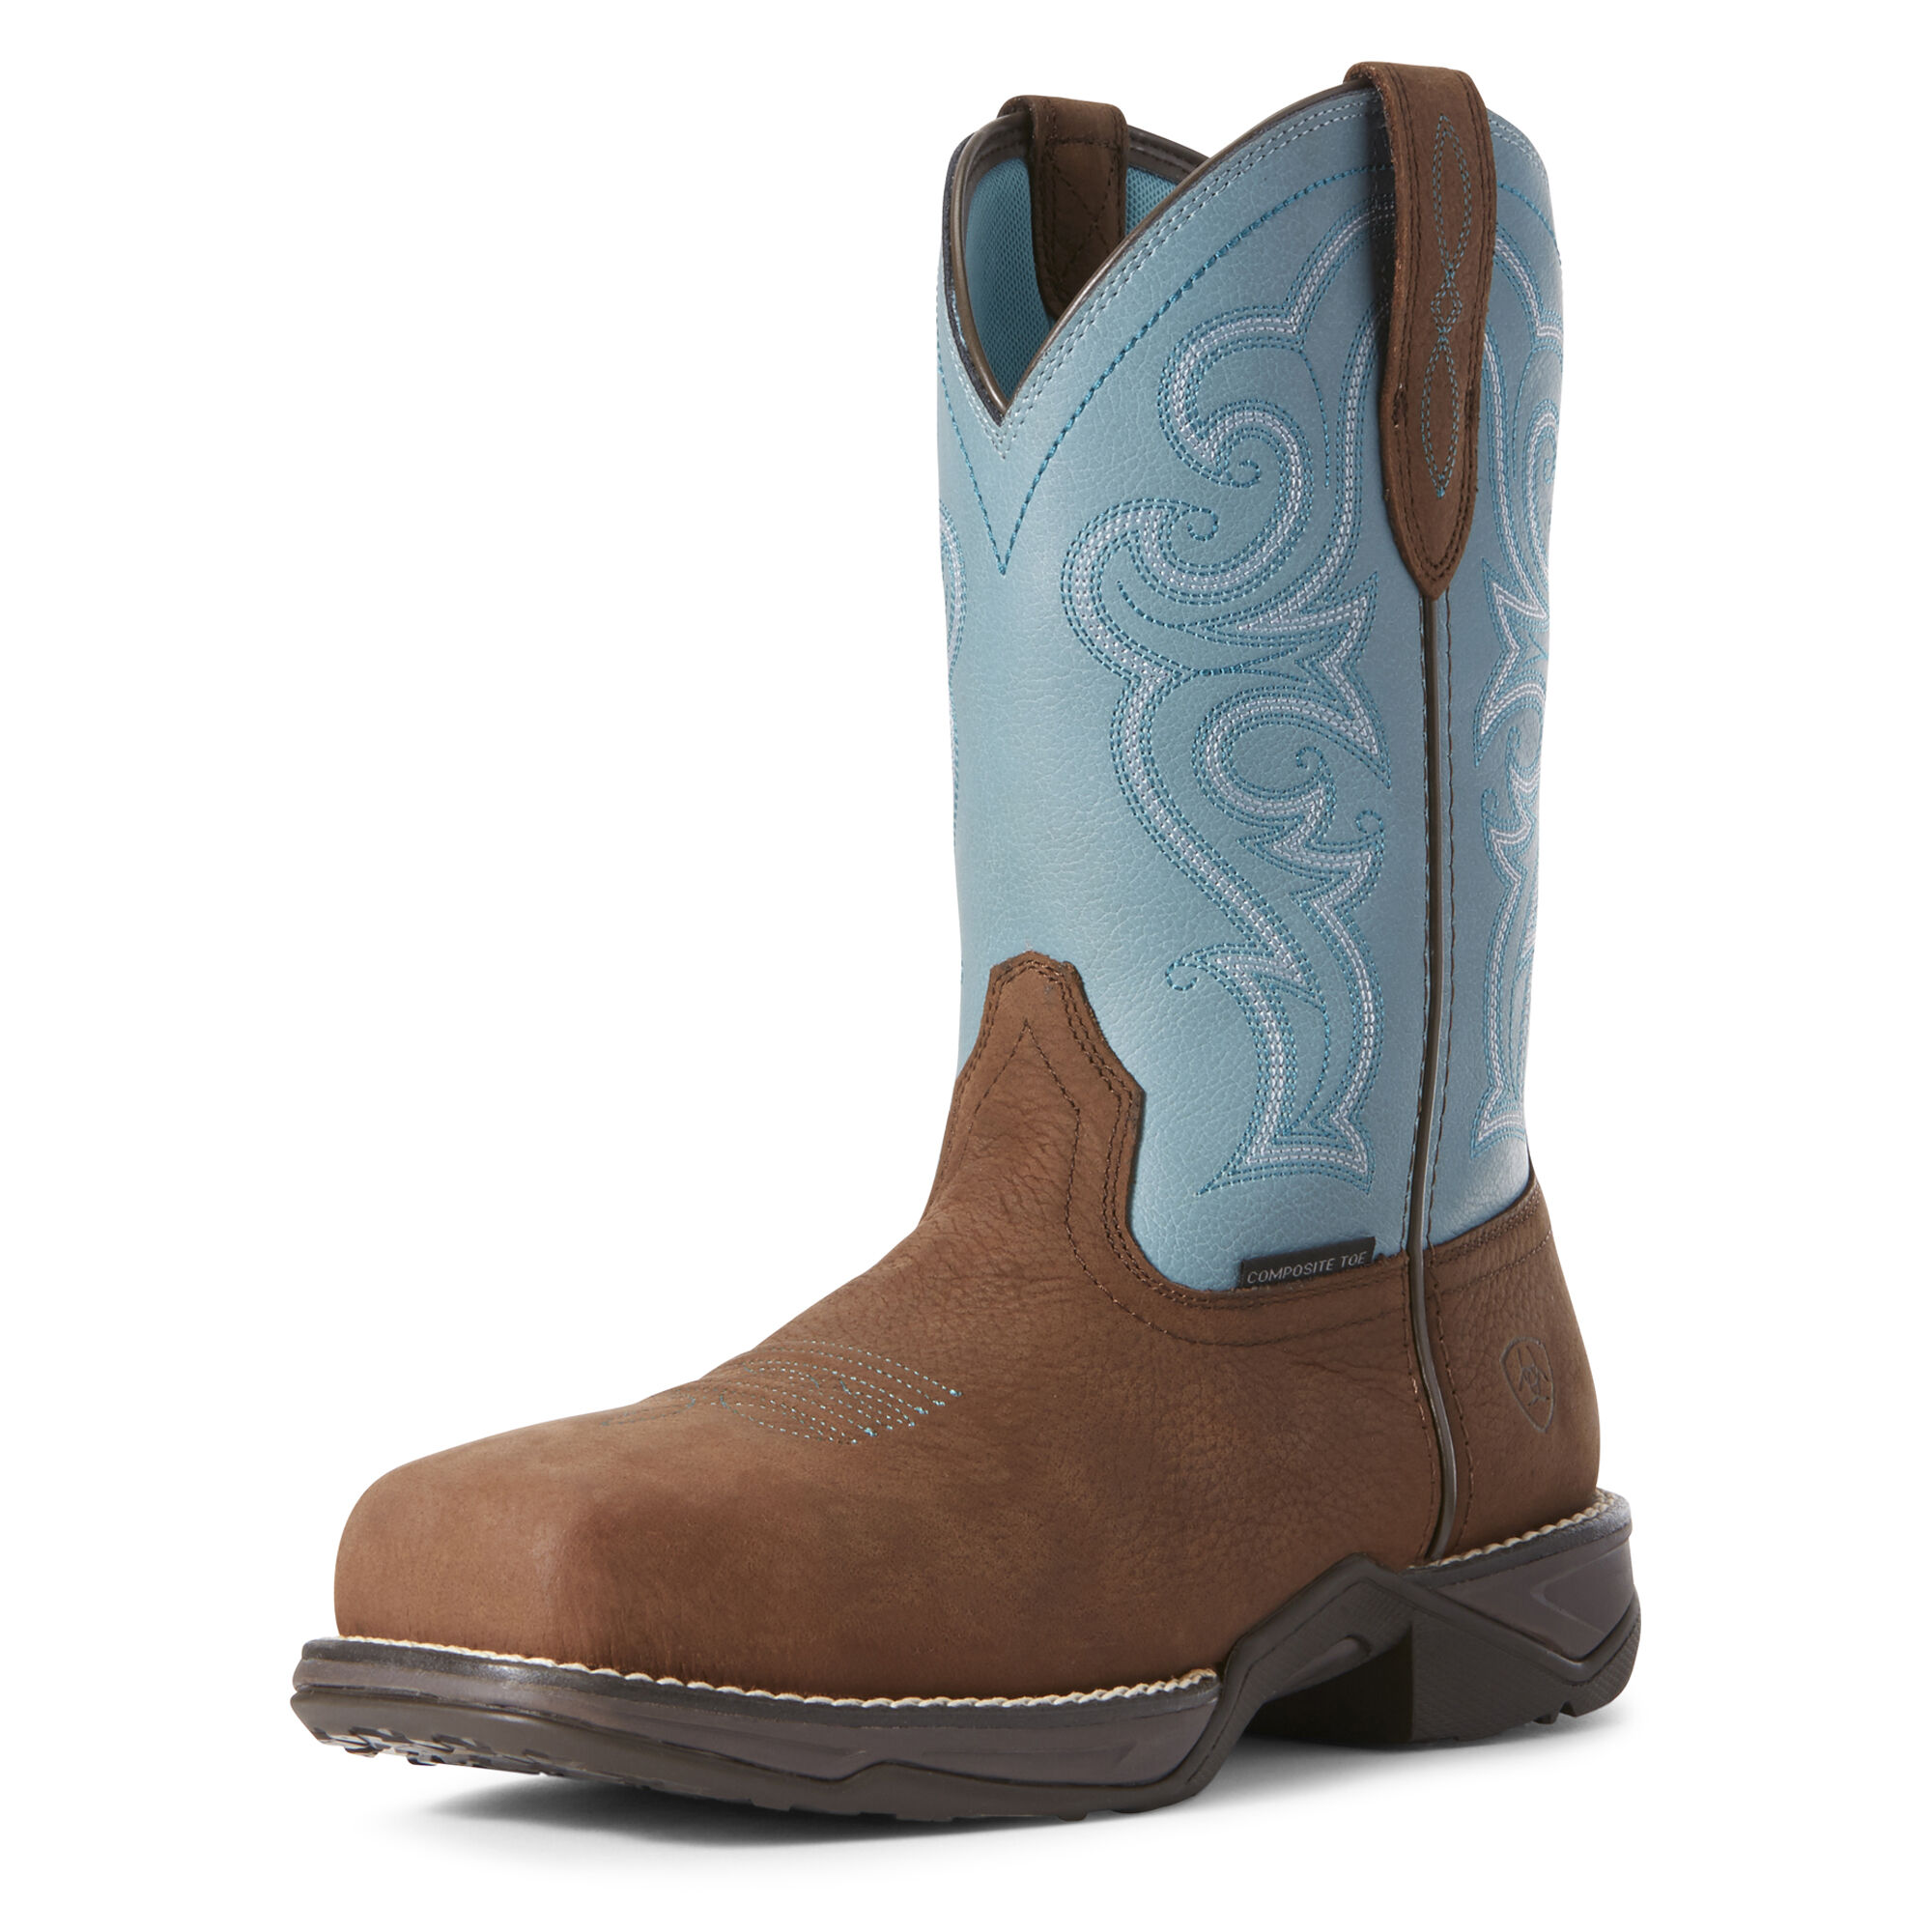 Women's Anthem Composite Toe Work Boots in Latigo Brown Leather  by Ariat